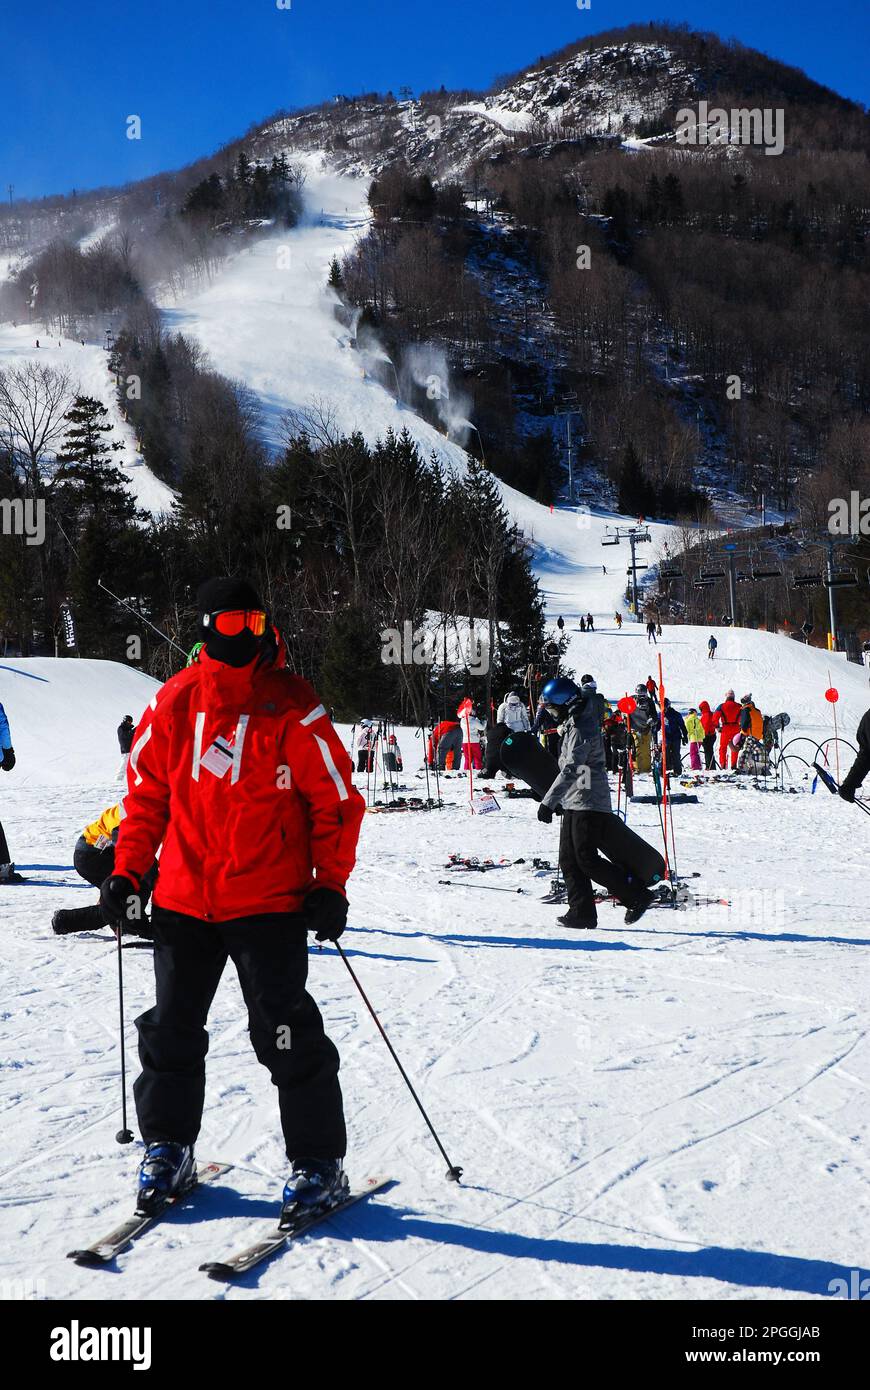 A rescue worker at a ski resort, wearing a red jacket, ensures the skiers are safe on the mountain slopes in winter Stock Photo